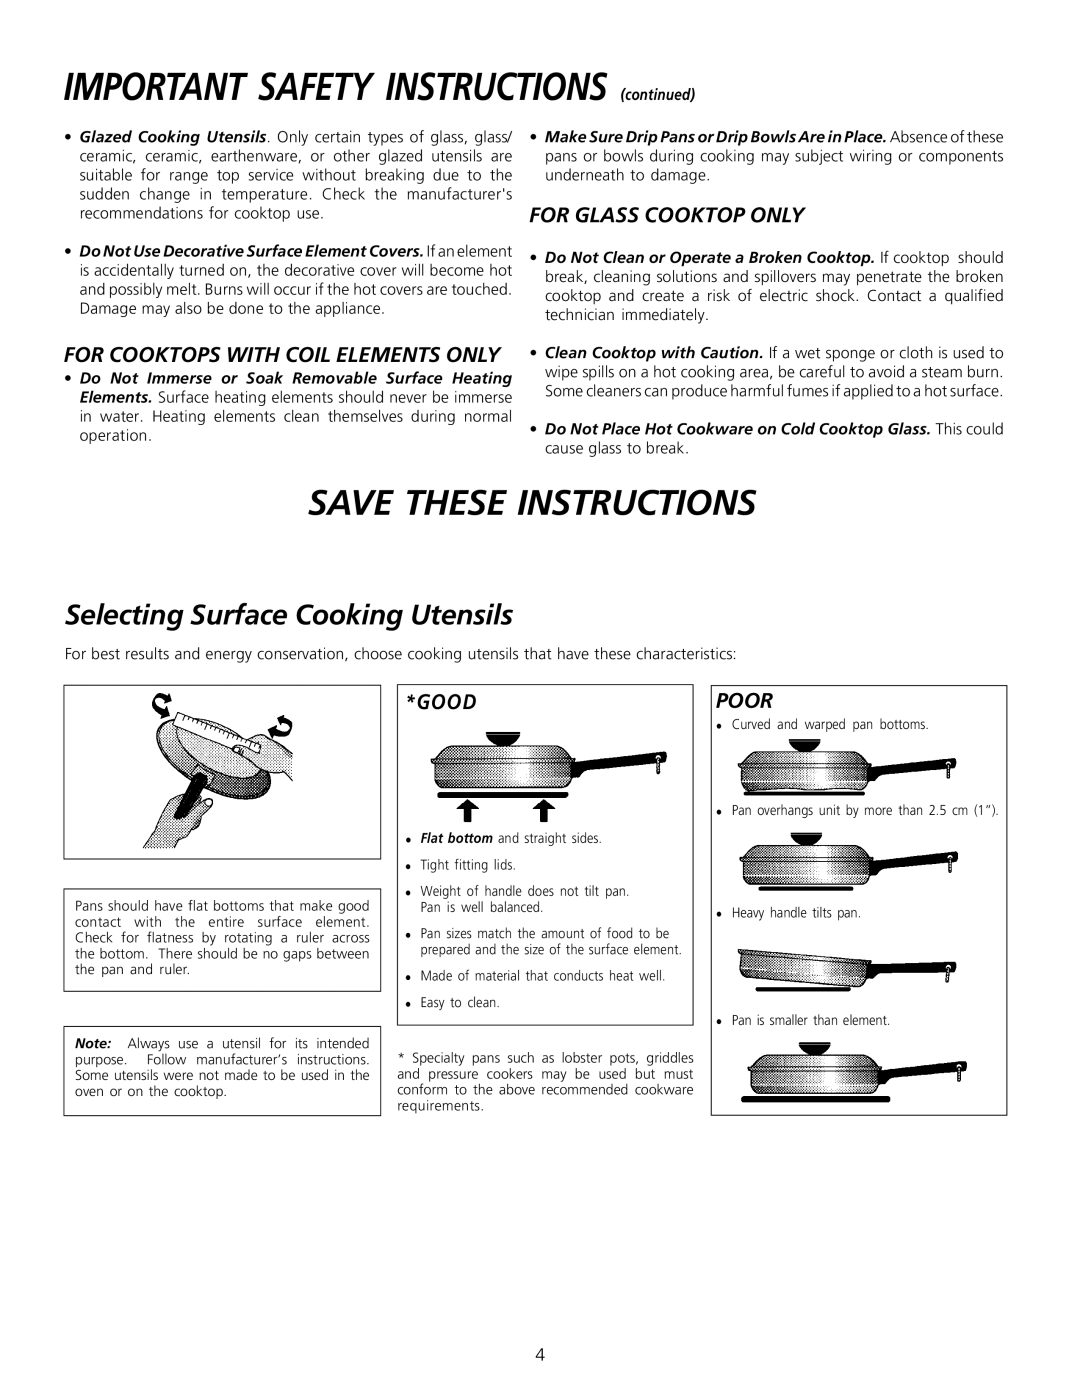 Frigidaire 318200603 IMPORTANT SAFETY INSTRUCTIONS continued, Selecting Surface Cooking Utensils, For Glass Cooktop Only 